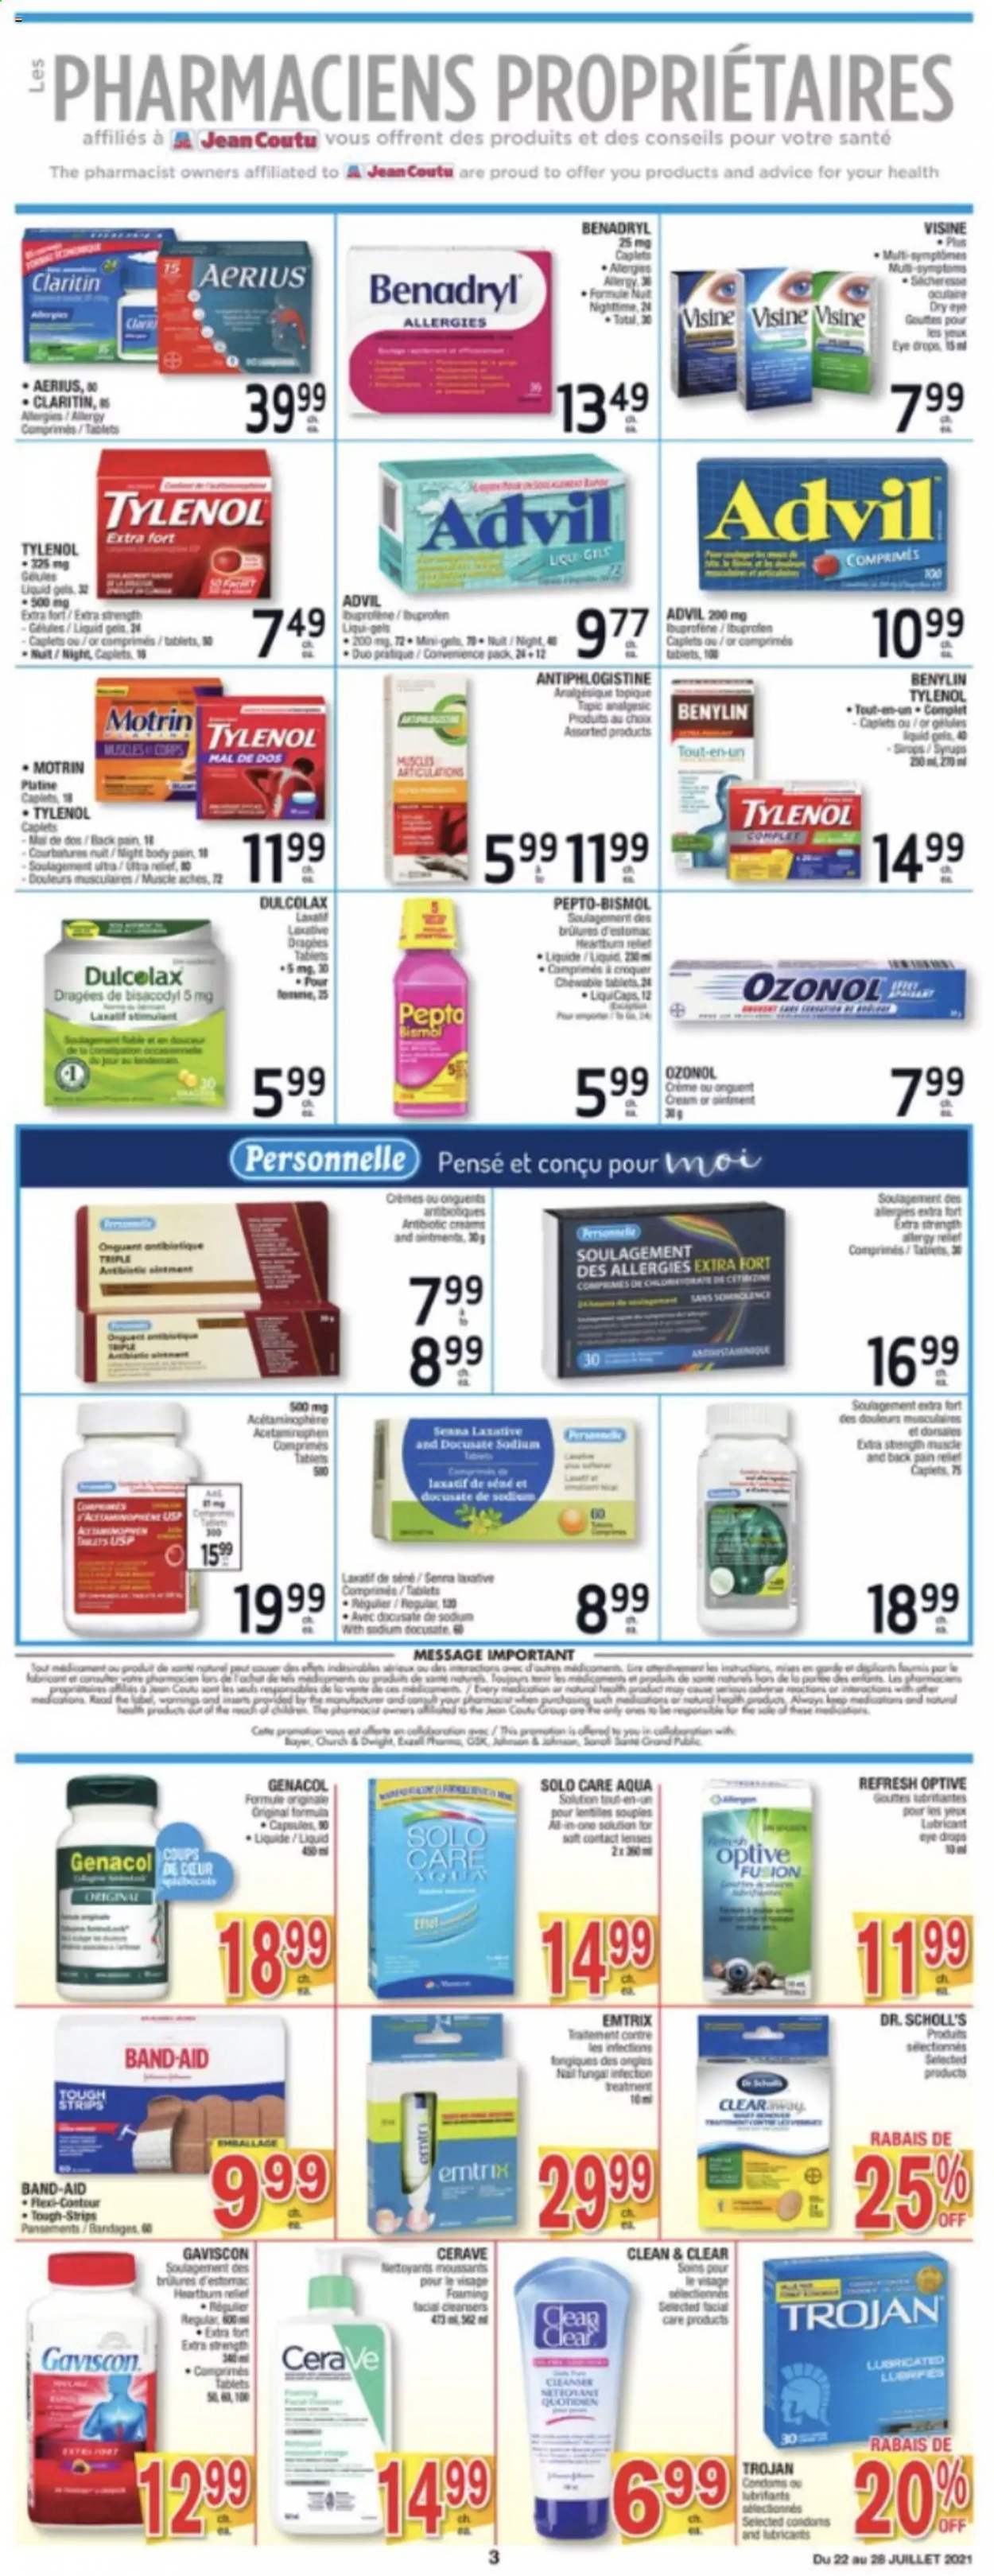 thumbnail - Jean Coutu Flyer - July 22, 2021 - July 28, 2021 - Sales products - CeraVe, Clean & Clear, contour, pan, Dr. Scholl's, Dulcolax, Tylenol, Ibuprofen, Pepto-bismol, eye drops, Advil Rapid, Gaviscon, Benylin, Motrin, lenses, contact lenses. Page 3.